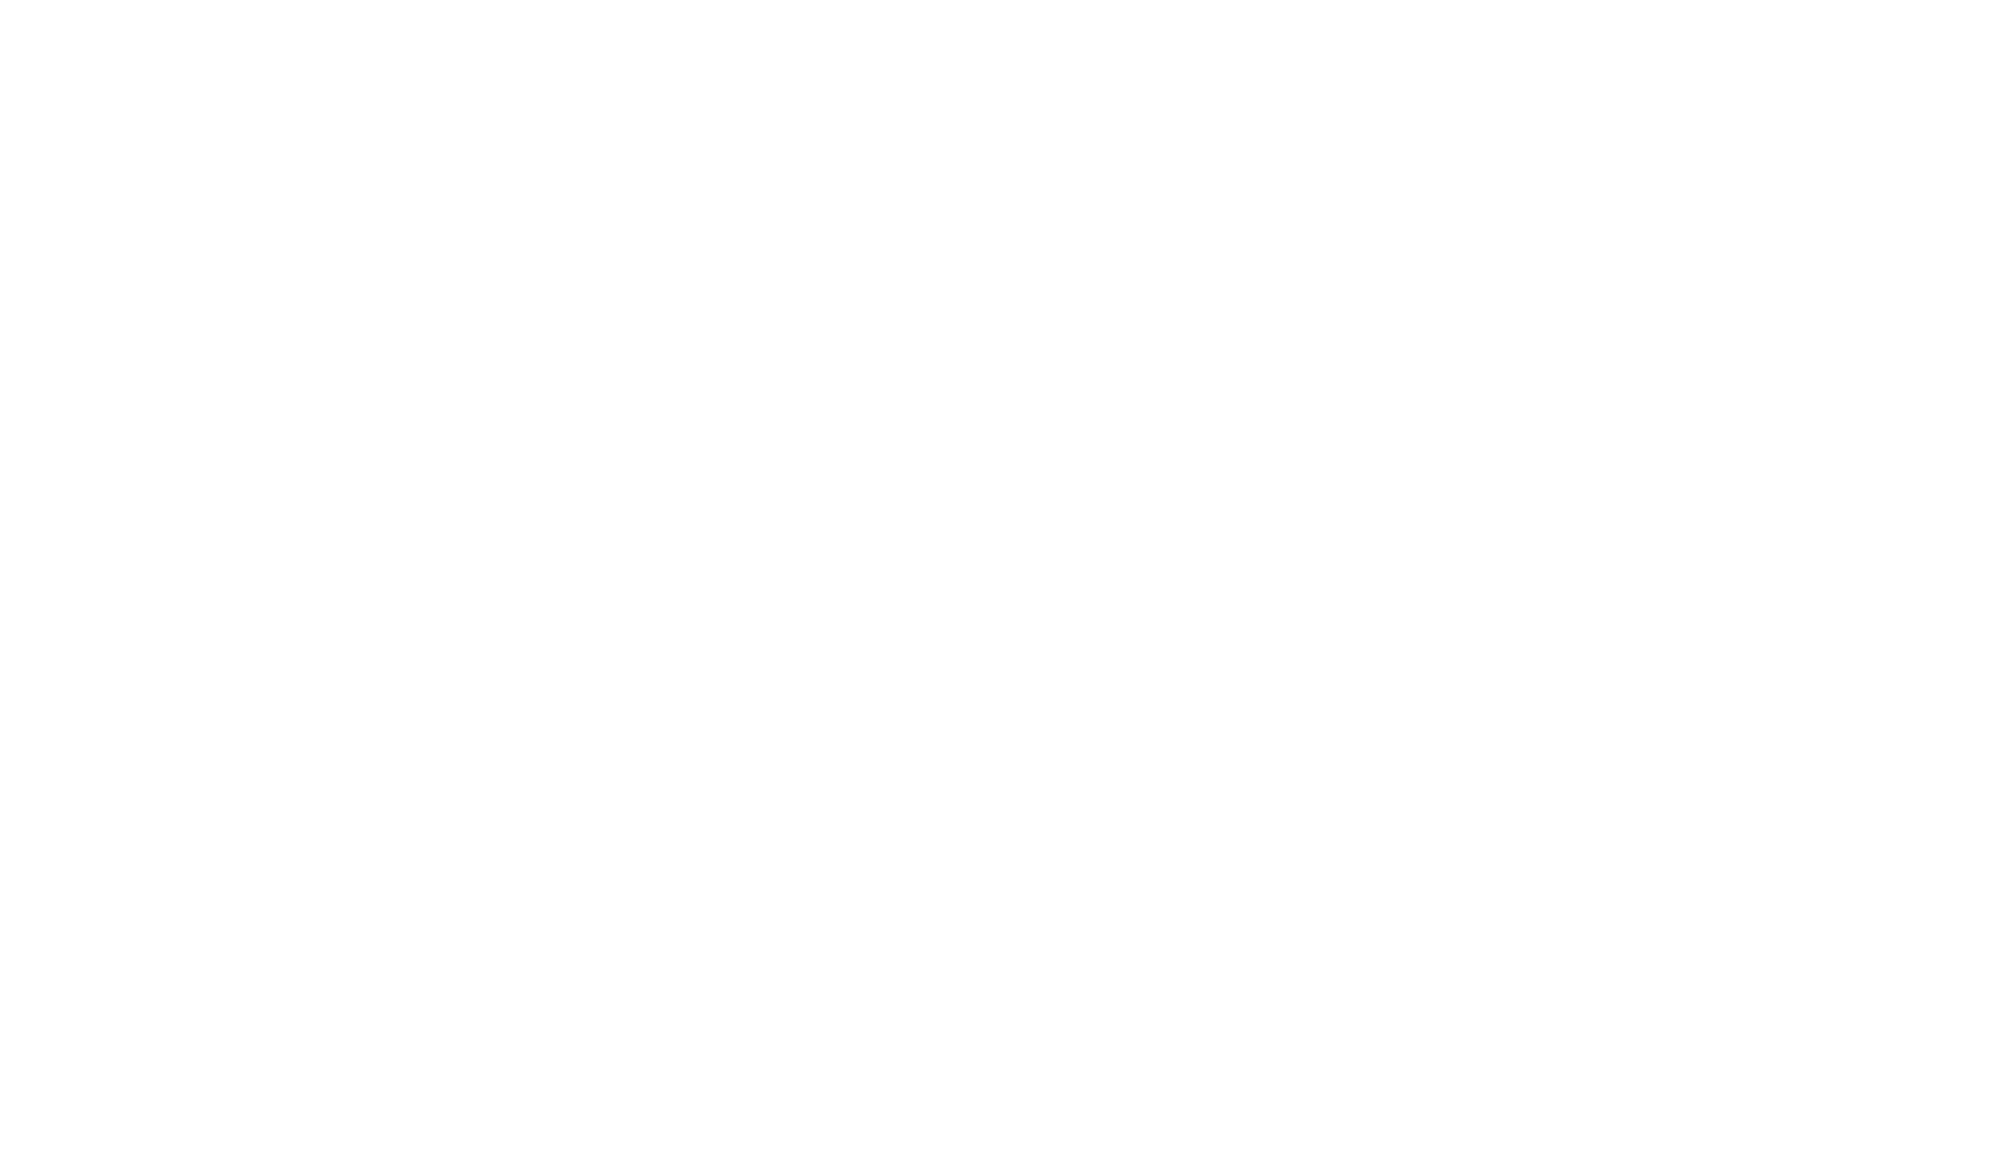 Third Time's a Charm typography